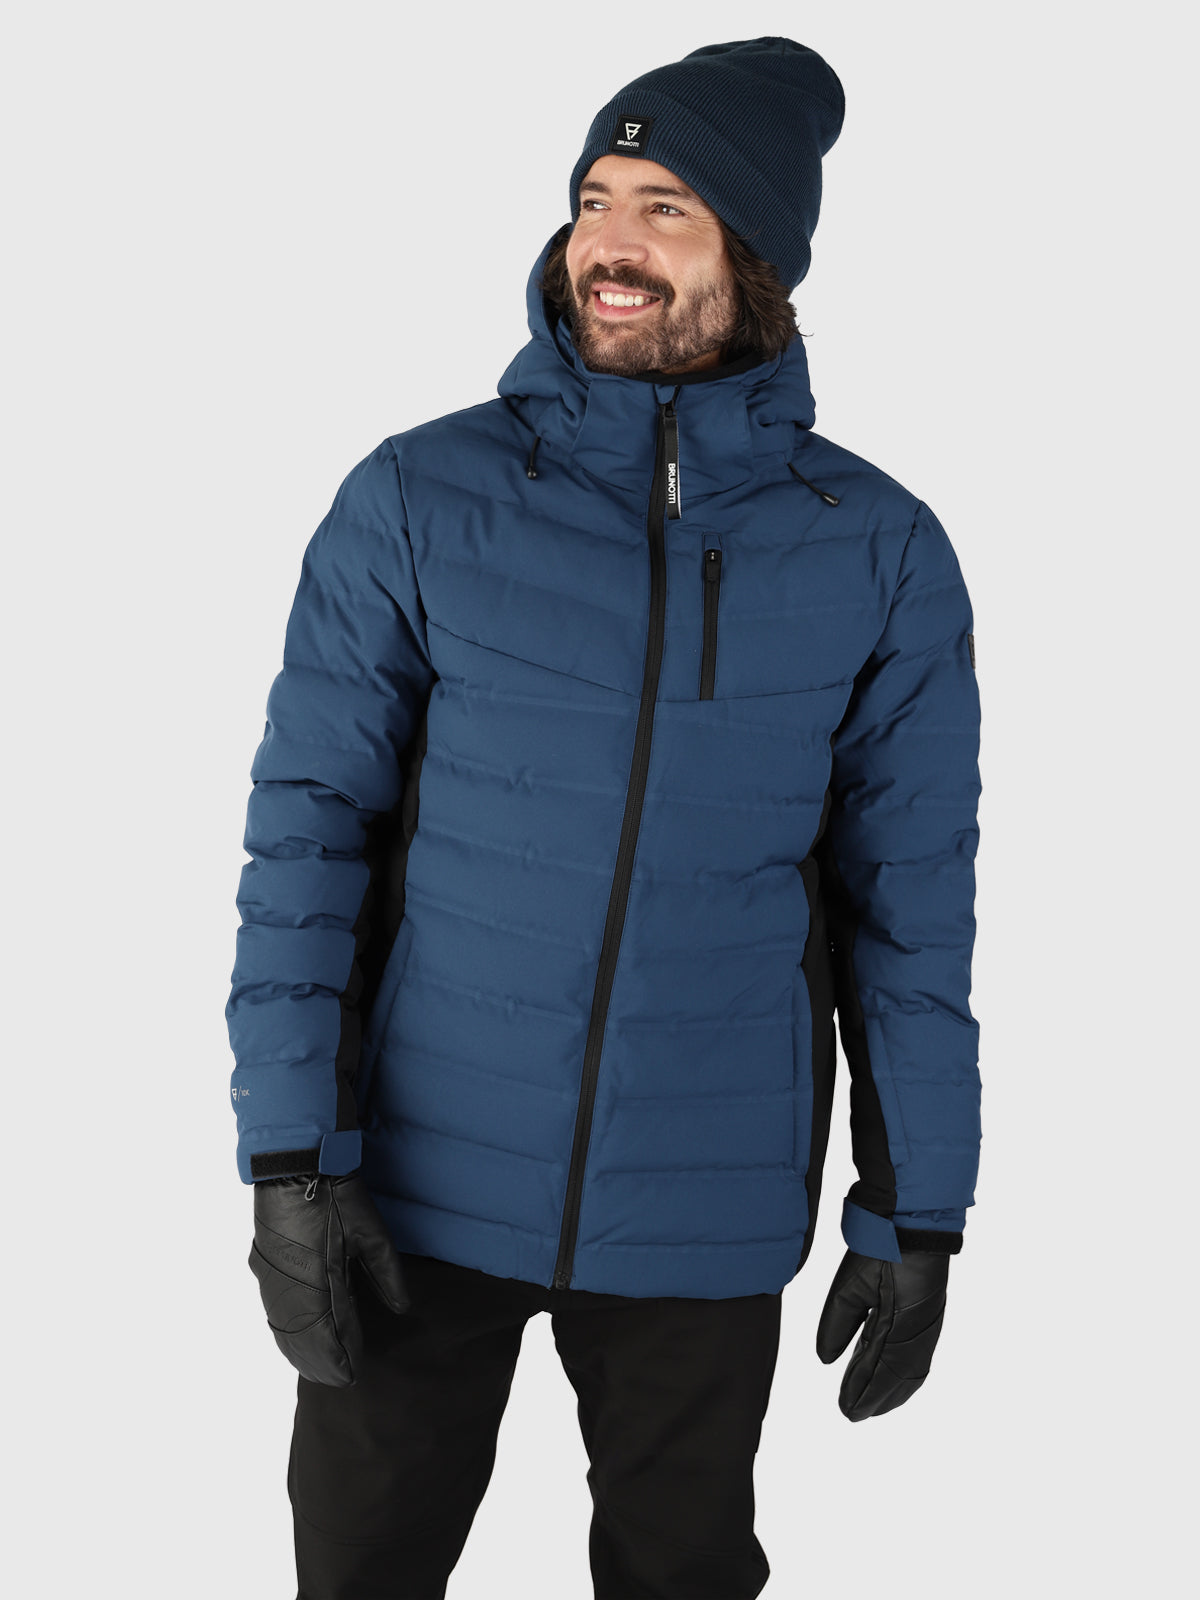 Winter Sports & Clothing Accessories